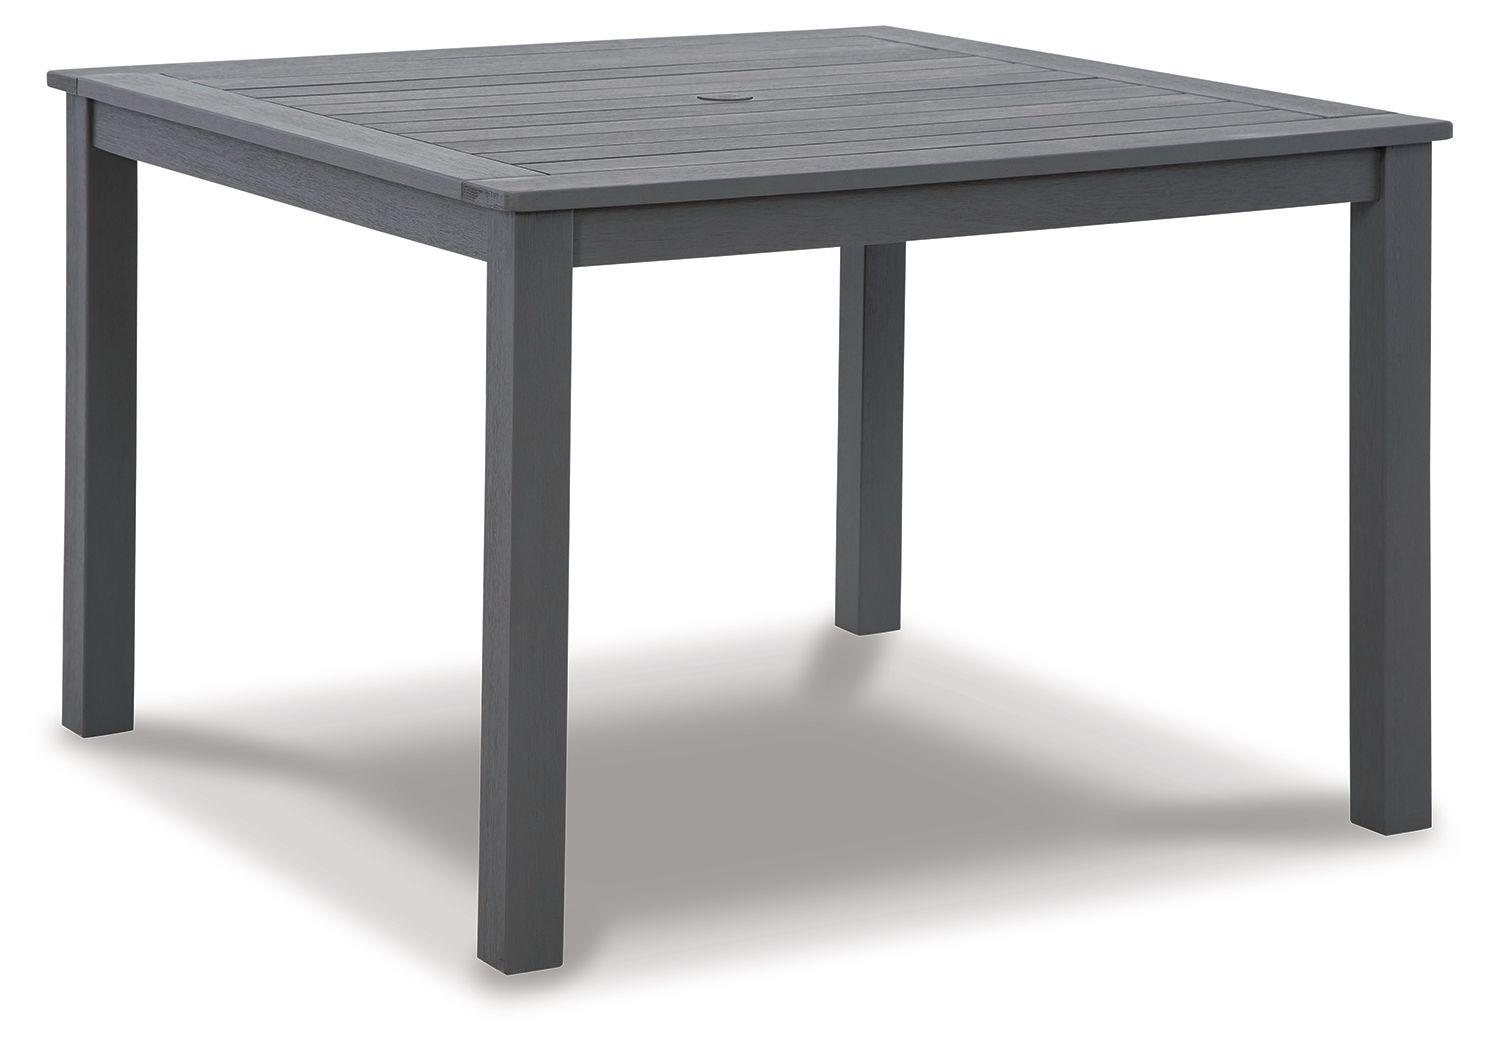 Signature Design by Ashley® - Eden Town - Gray - Square Dining Table W/Umb Opt - 5th Avenue Furniture